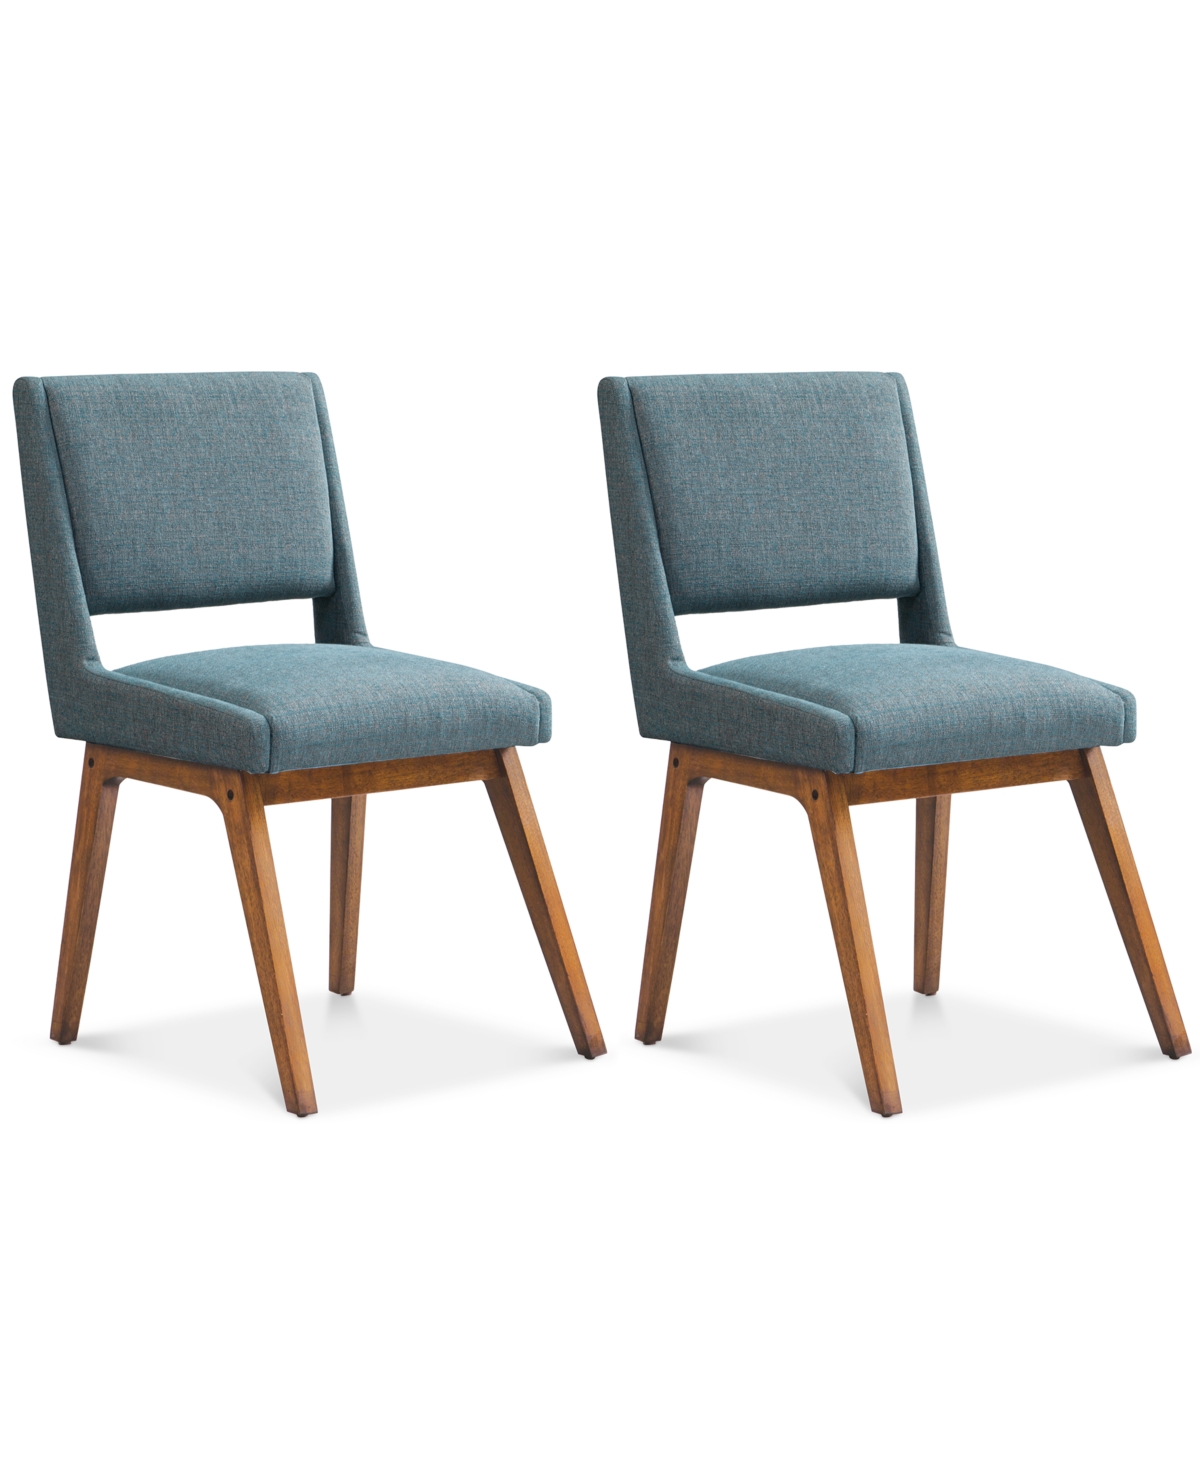 Brine Set of 2 Dining Chairs